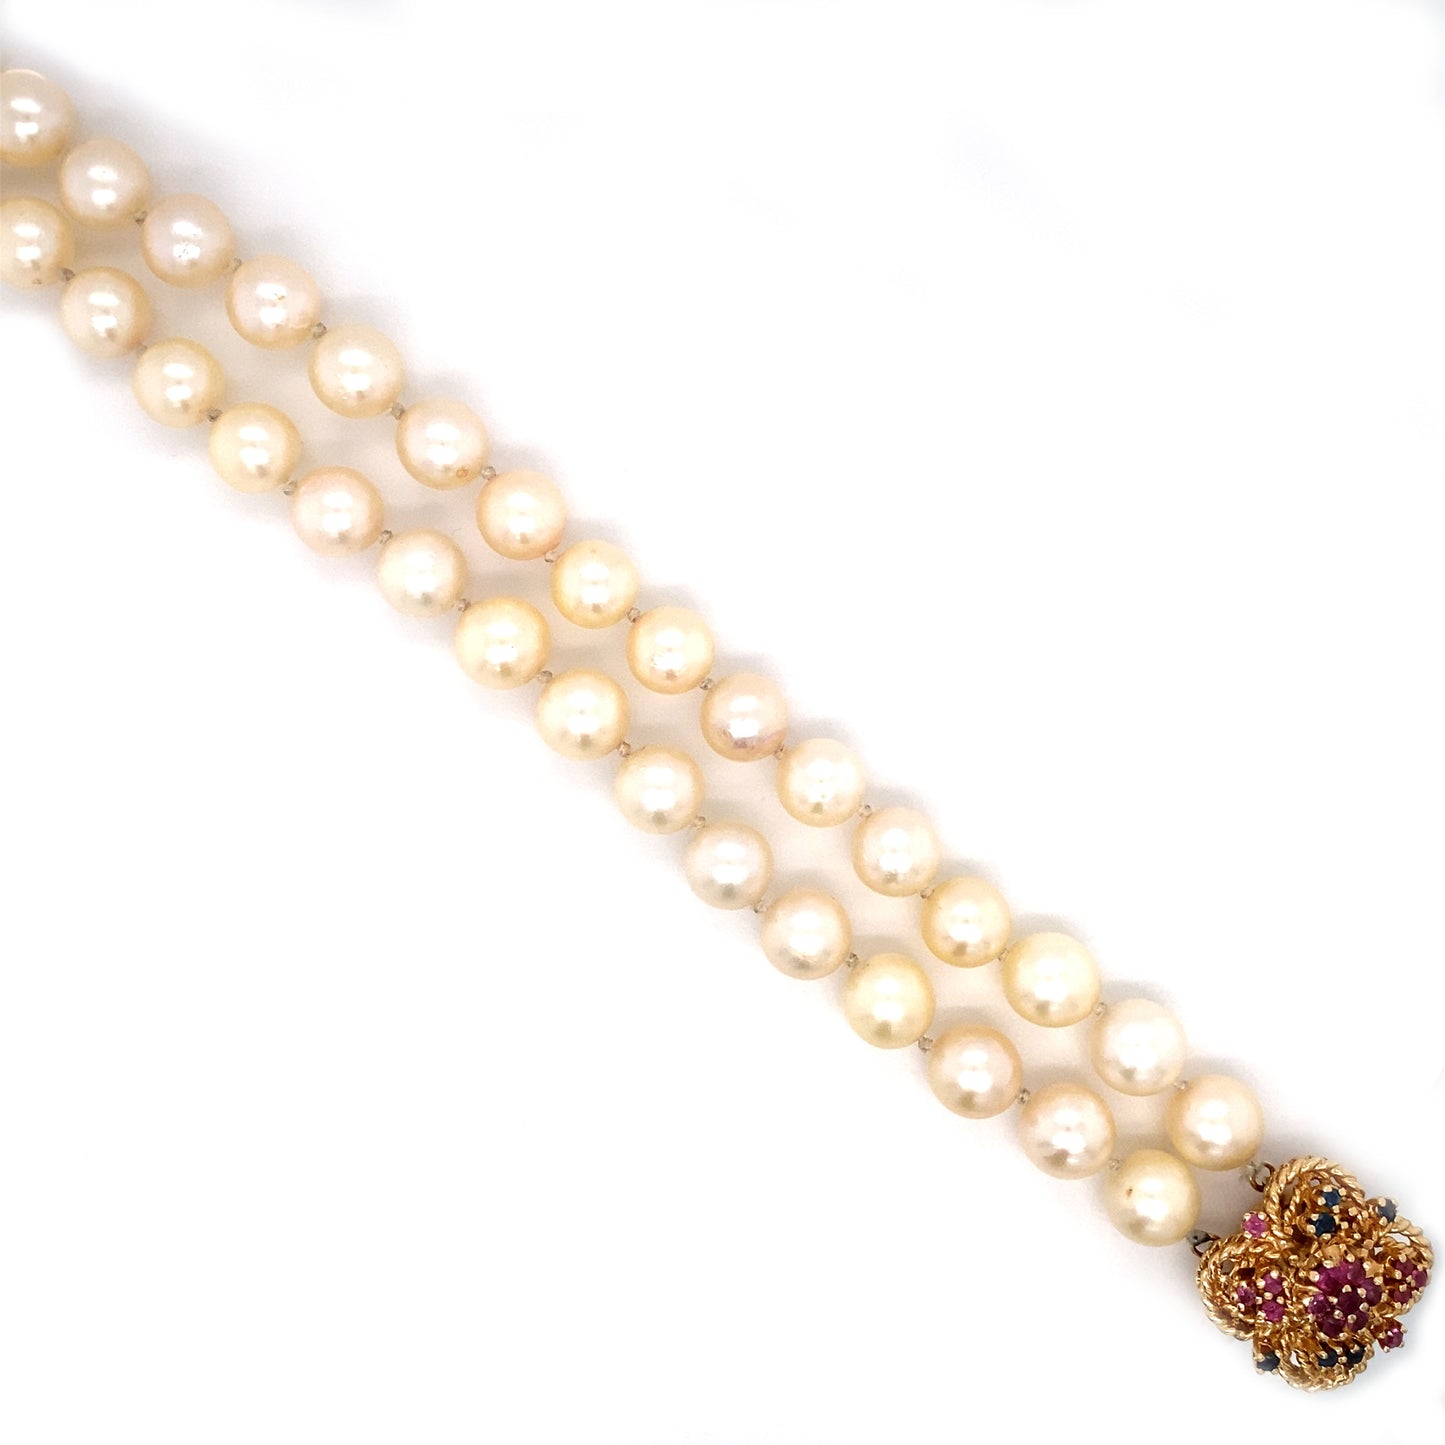 Circa 1980 Double Strand Pearl Bracelet with Ruby and Sapphire Clasp in 14 Karat Gold